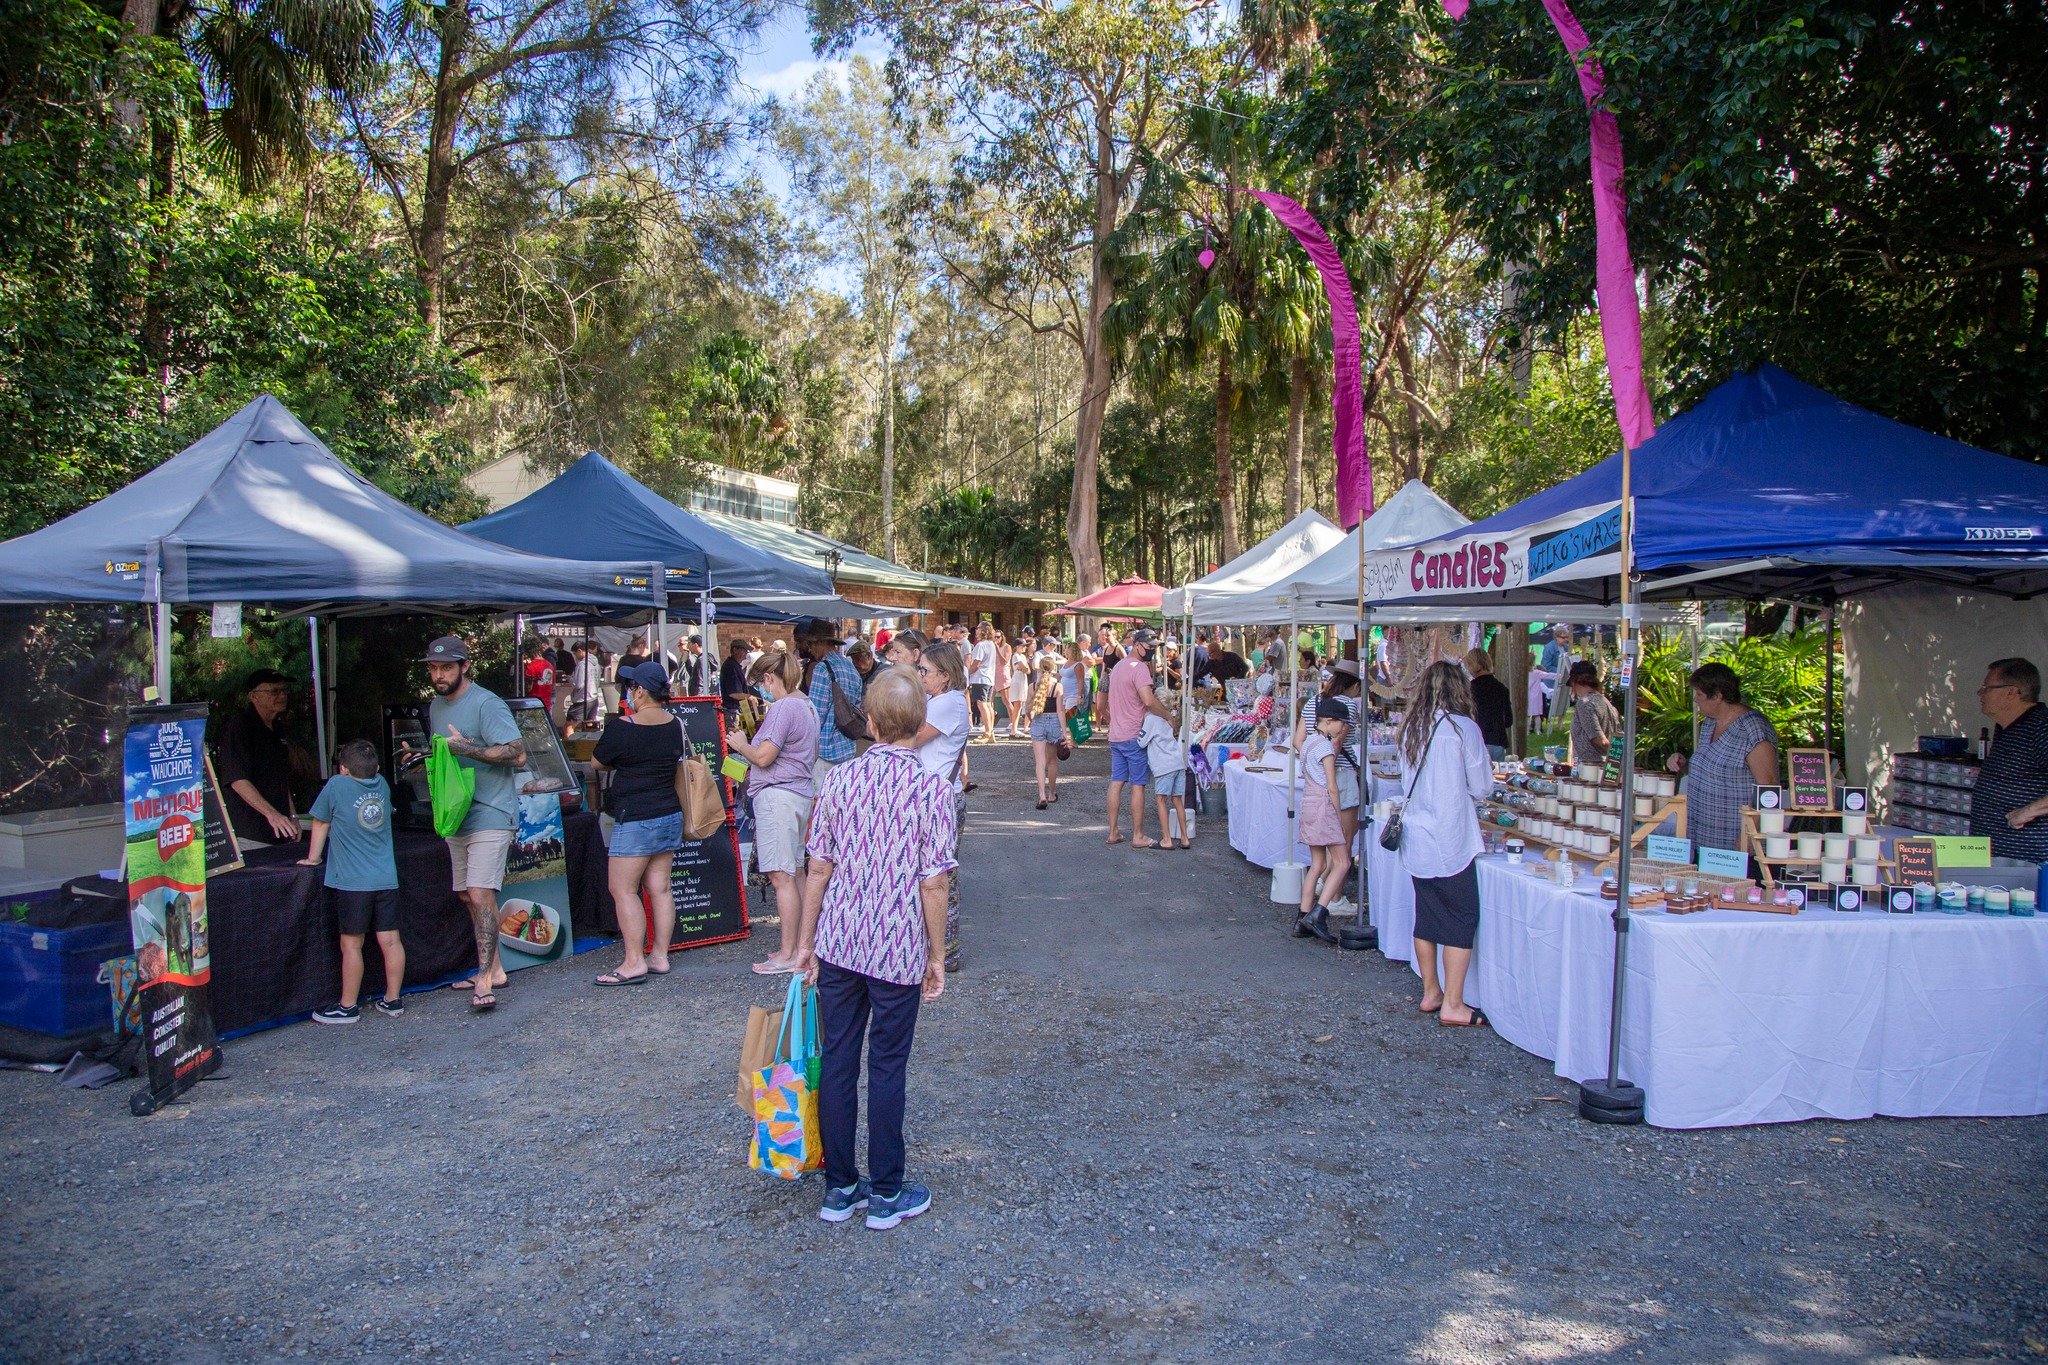 The Community Centre outside the Recky comes alive this morning with the Pacific Palms Community Market kicking off from 9am. Come browse the colourful stalls including local eco and fair trade products, jewellery, art, craft, clothes, plants, fruit,